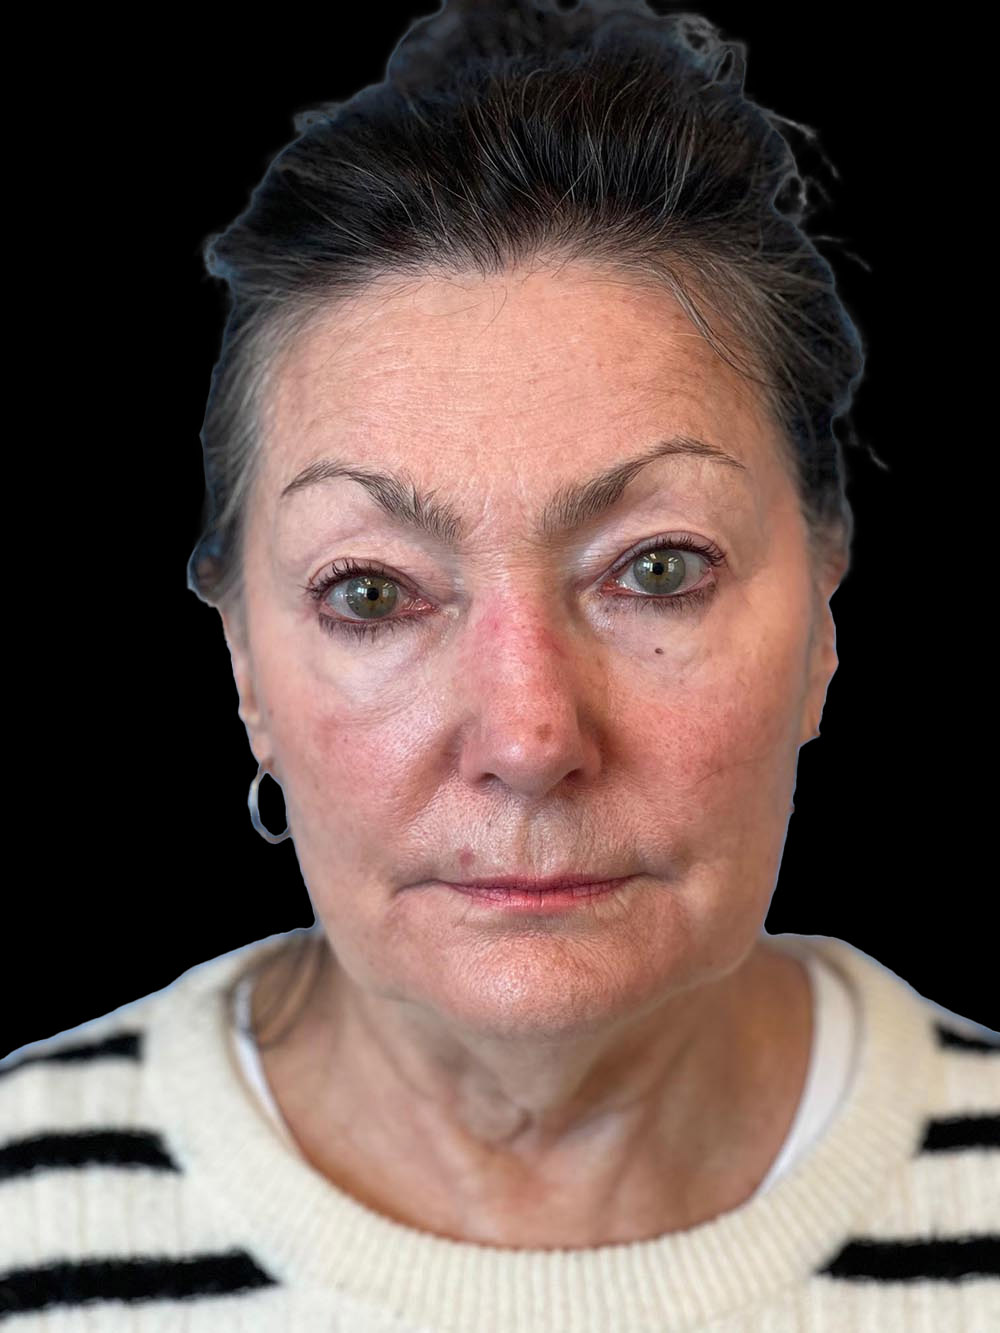 Photo of the patient’s face before the Facelift surgery. Patient 5 - Set 1